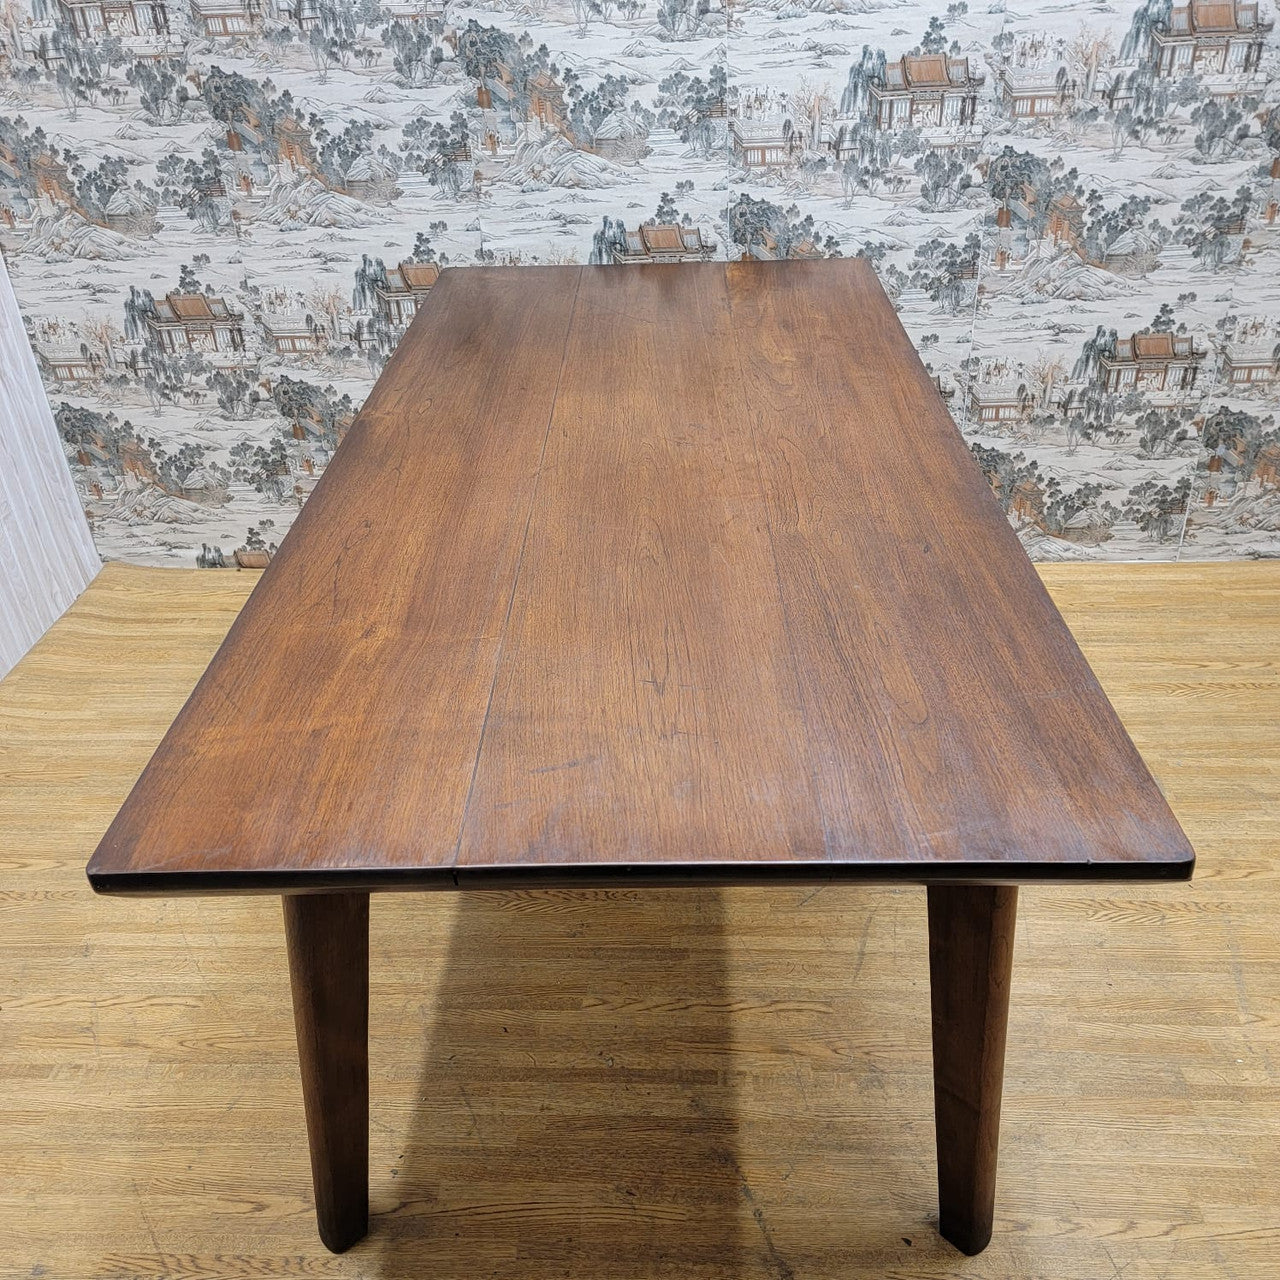 Antique East Indian British Colonial Teak 6 Seat Dining Table